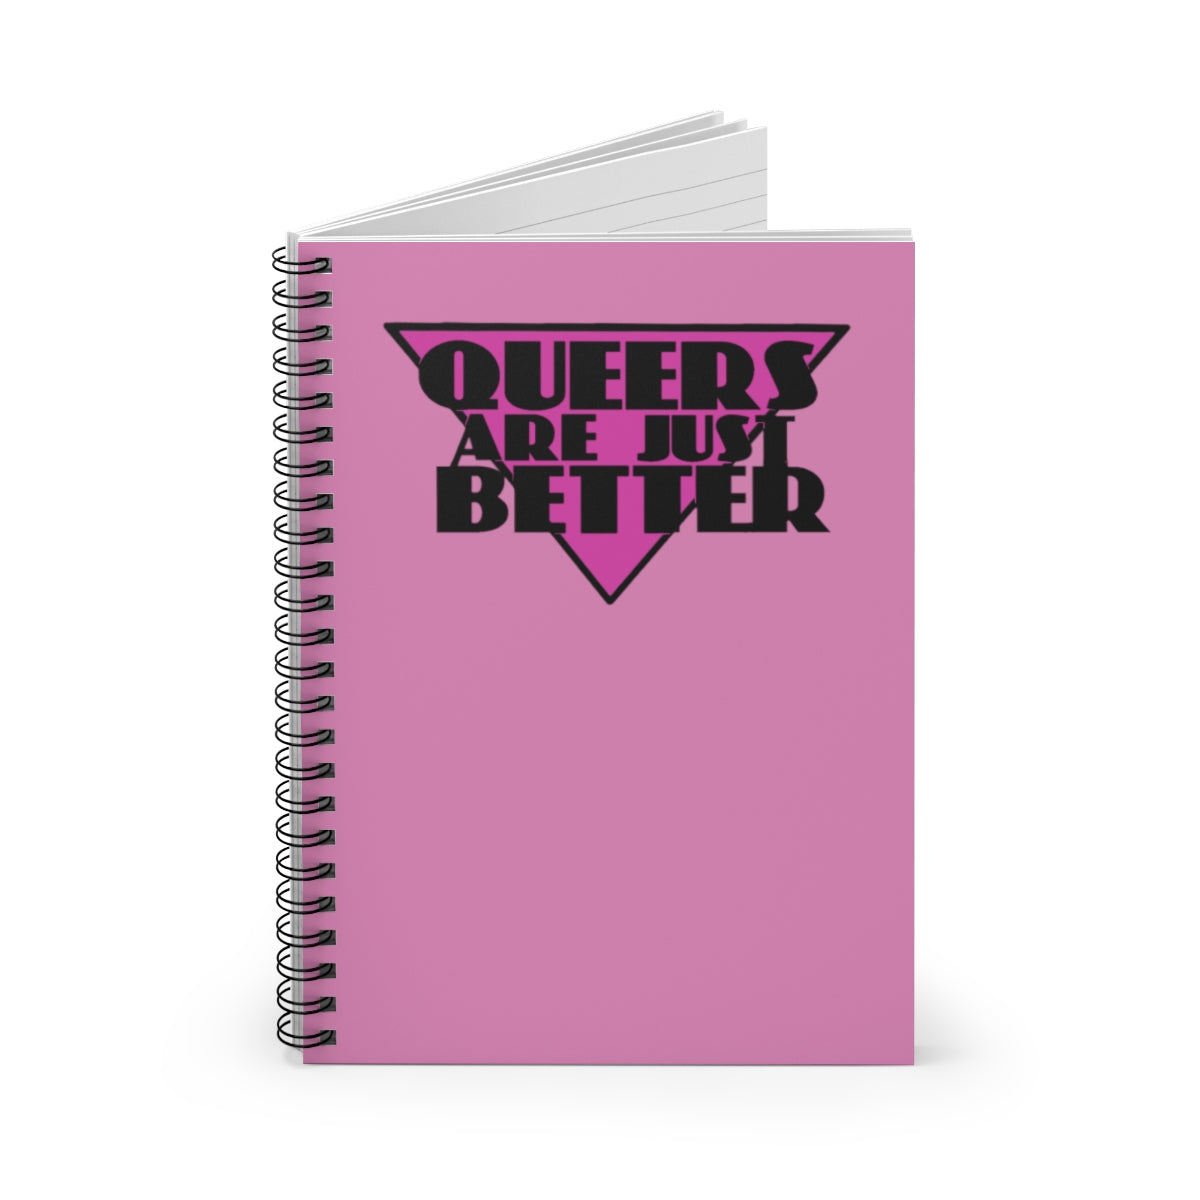 Queers Are Just Better Spiral Notebook - Ruled Line - MISTERBNATION